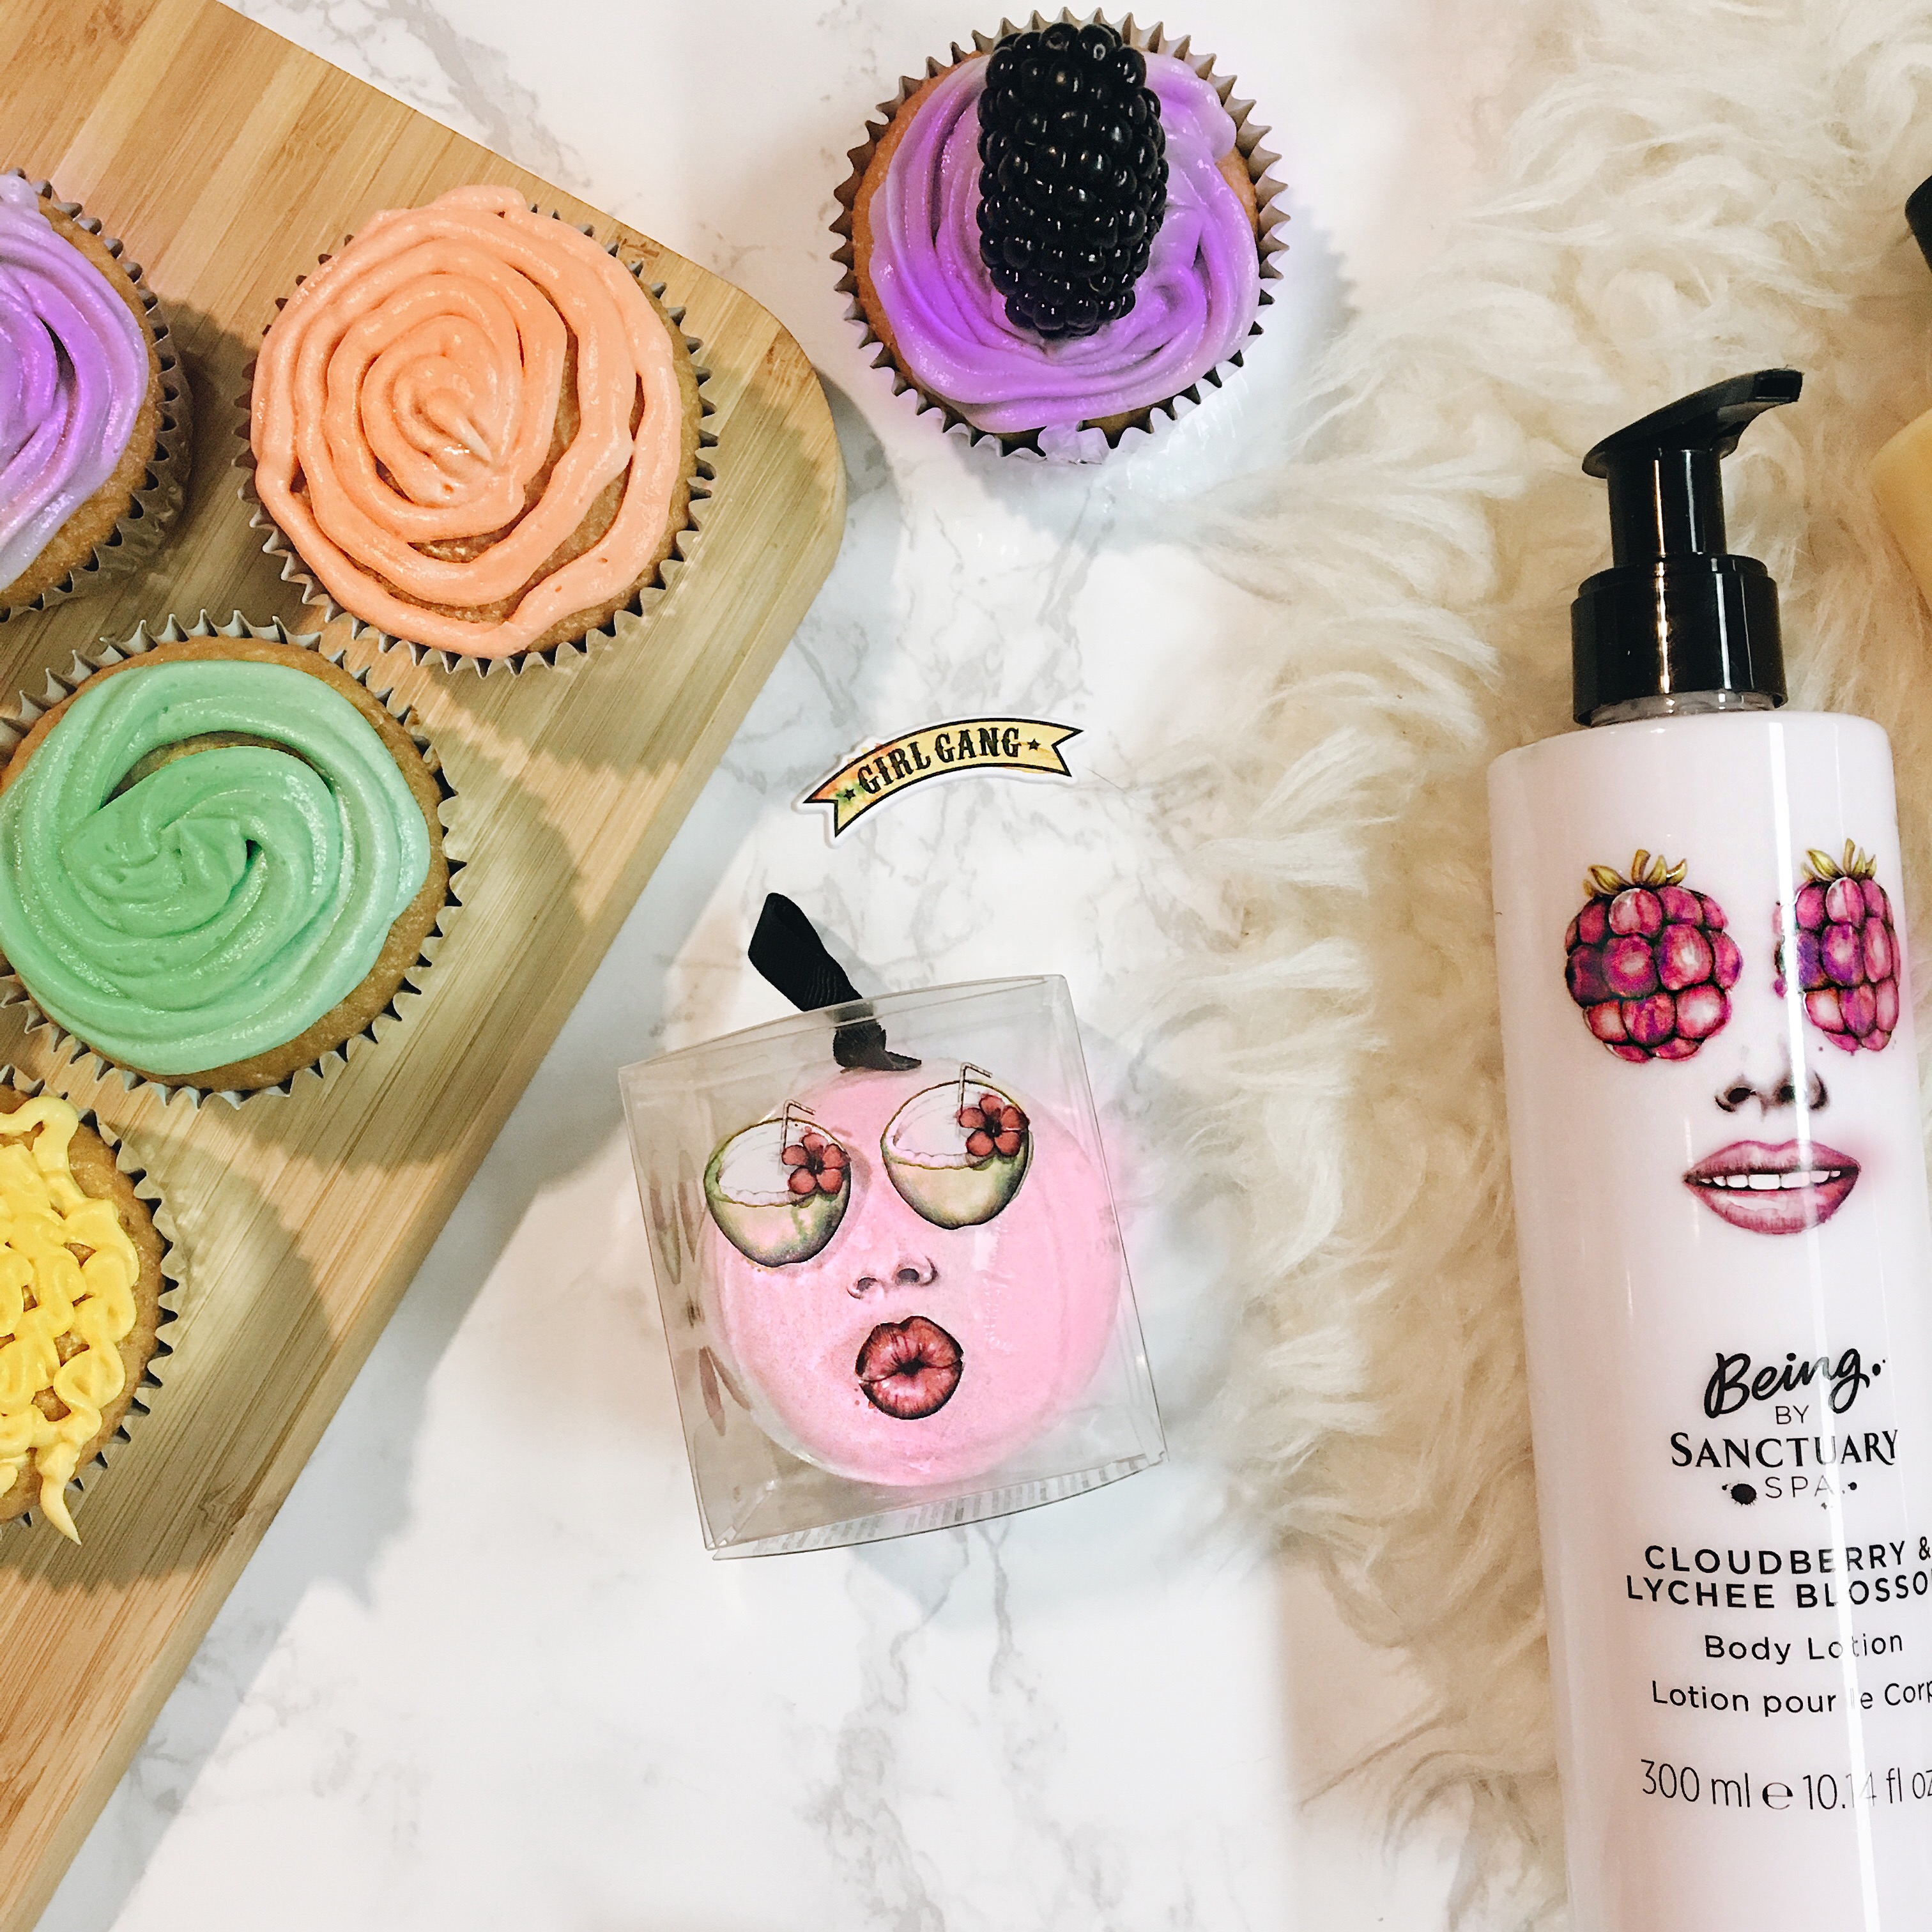 Being by Sanctuary Spa-body lotion-cupcakes-ulta-skincare